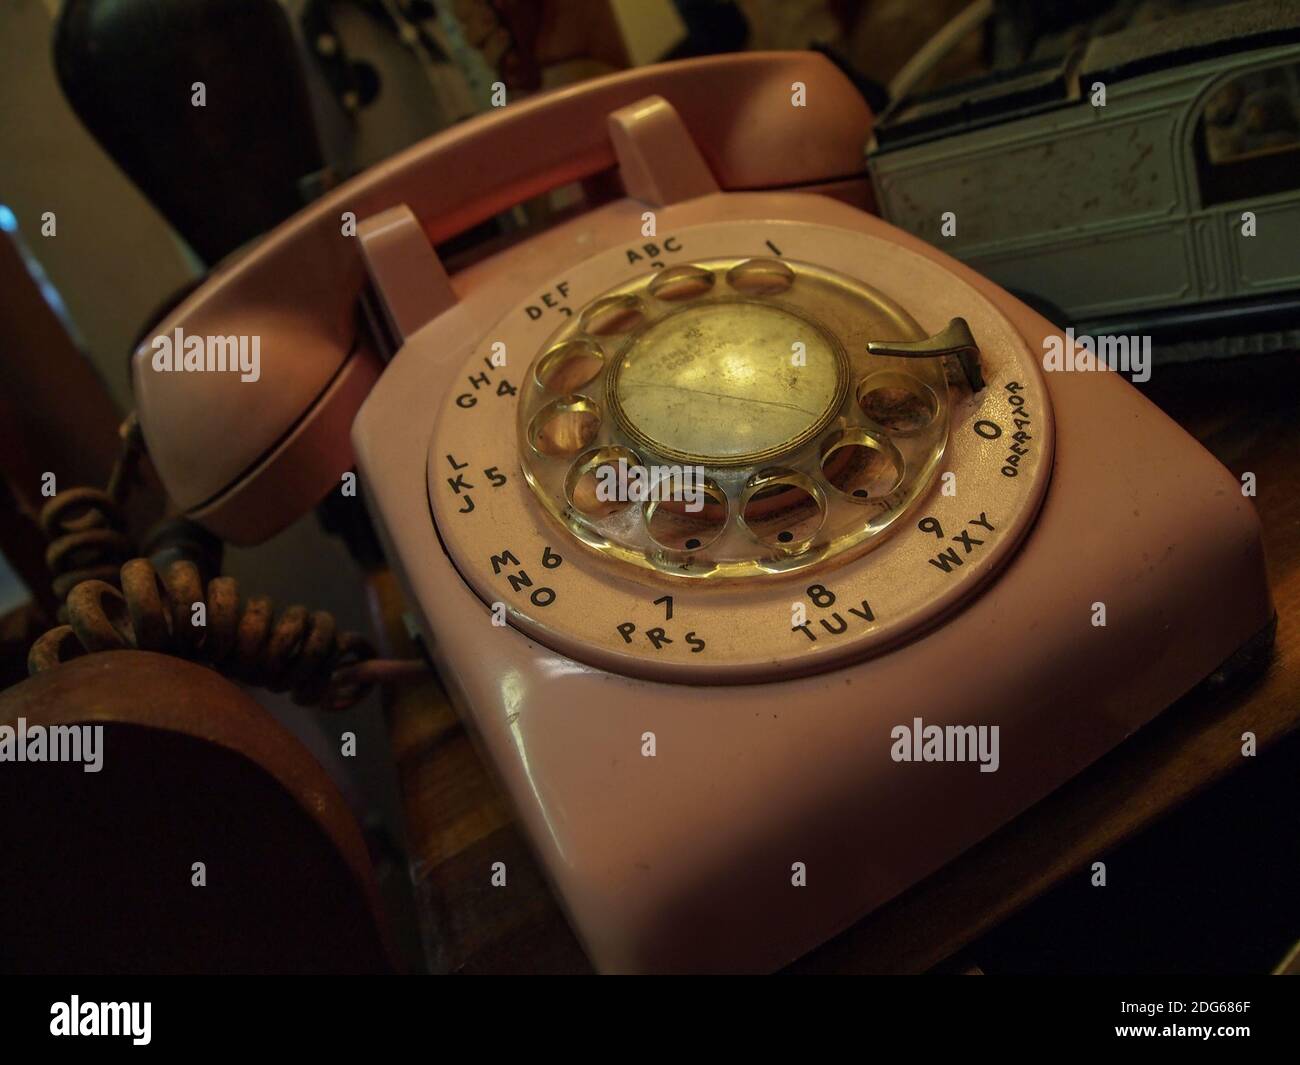 A worn, dirty old vintage pink telephone is nestled among other forgotten artifacts of the 1900s in a dark room. Stock Photo